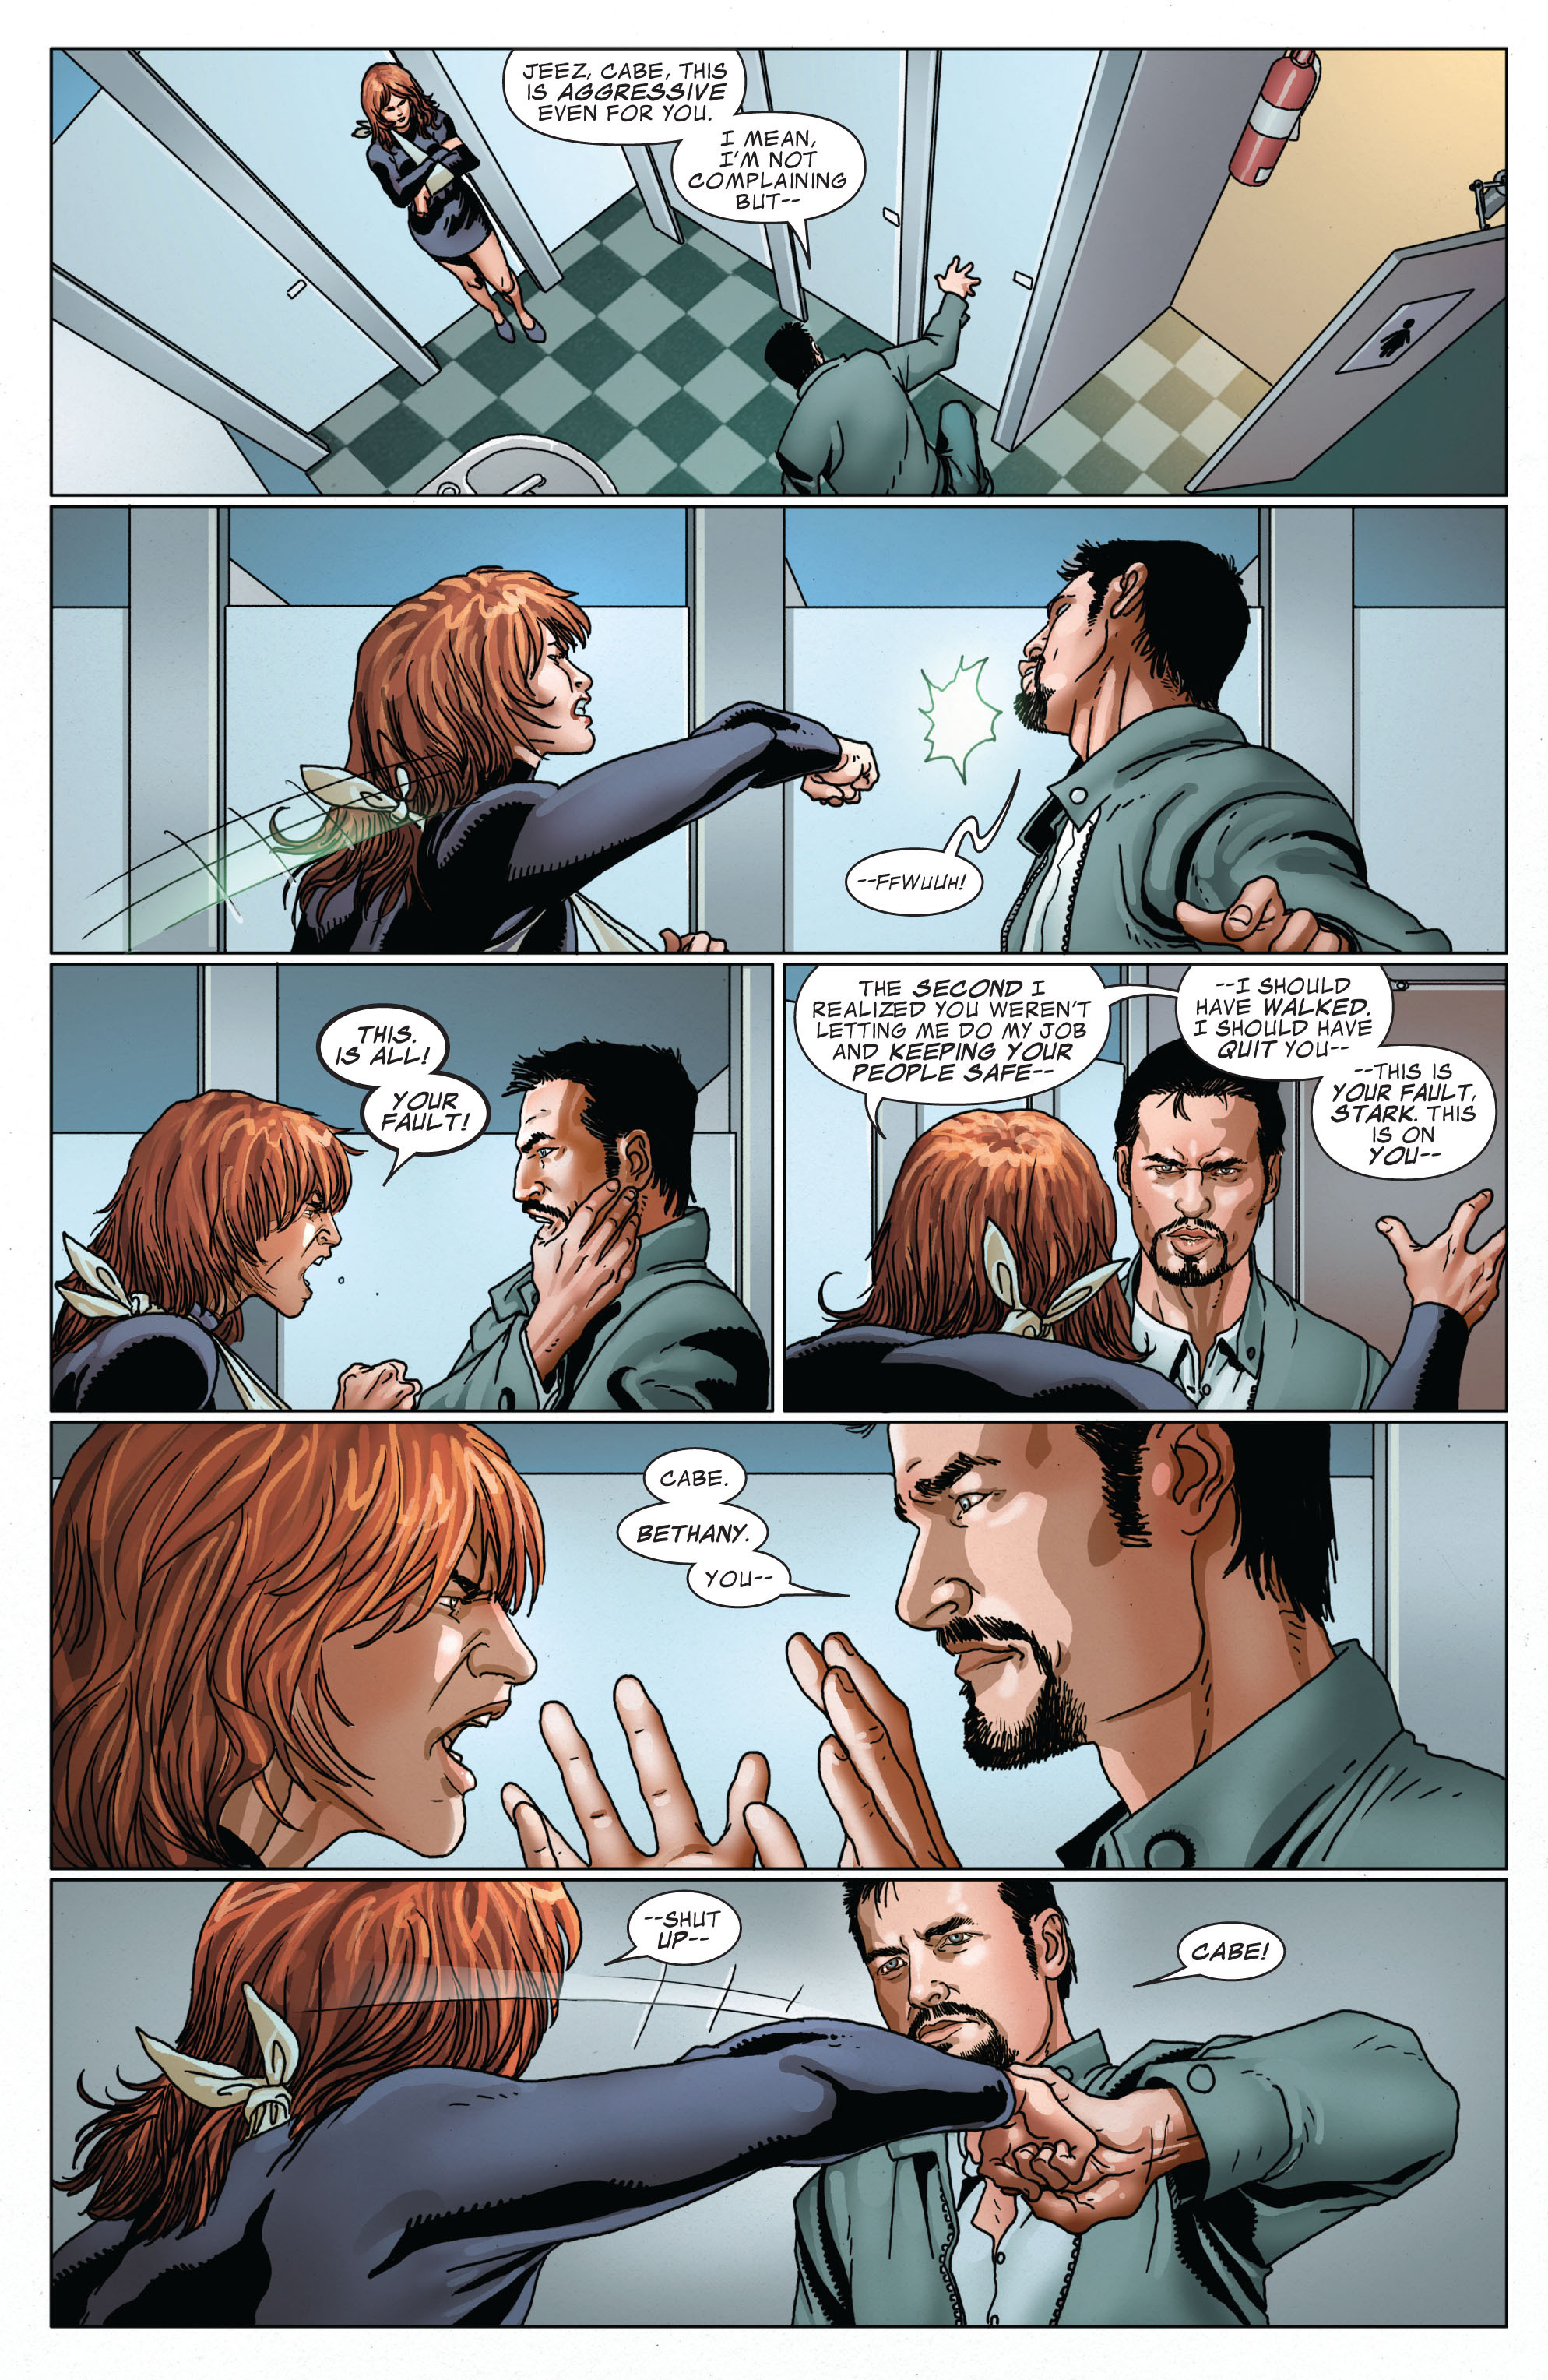 Invincible Iron Man (2008) 519 Page 8